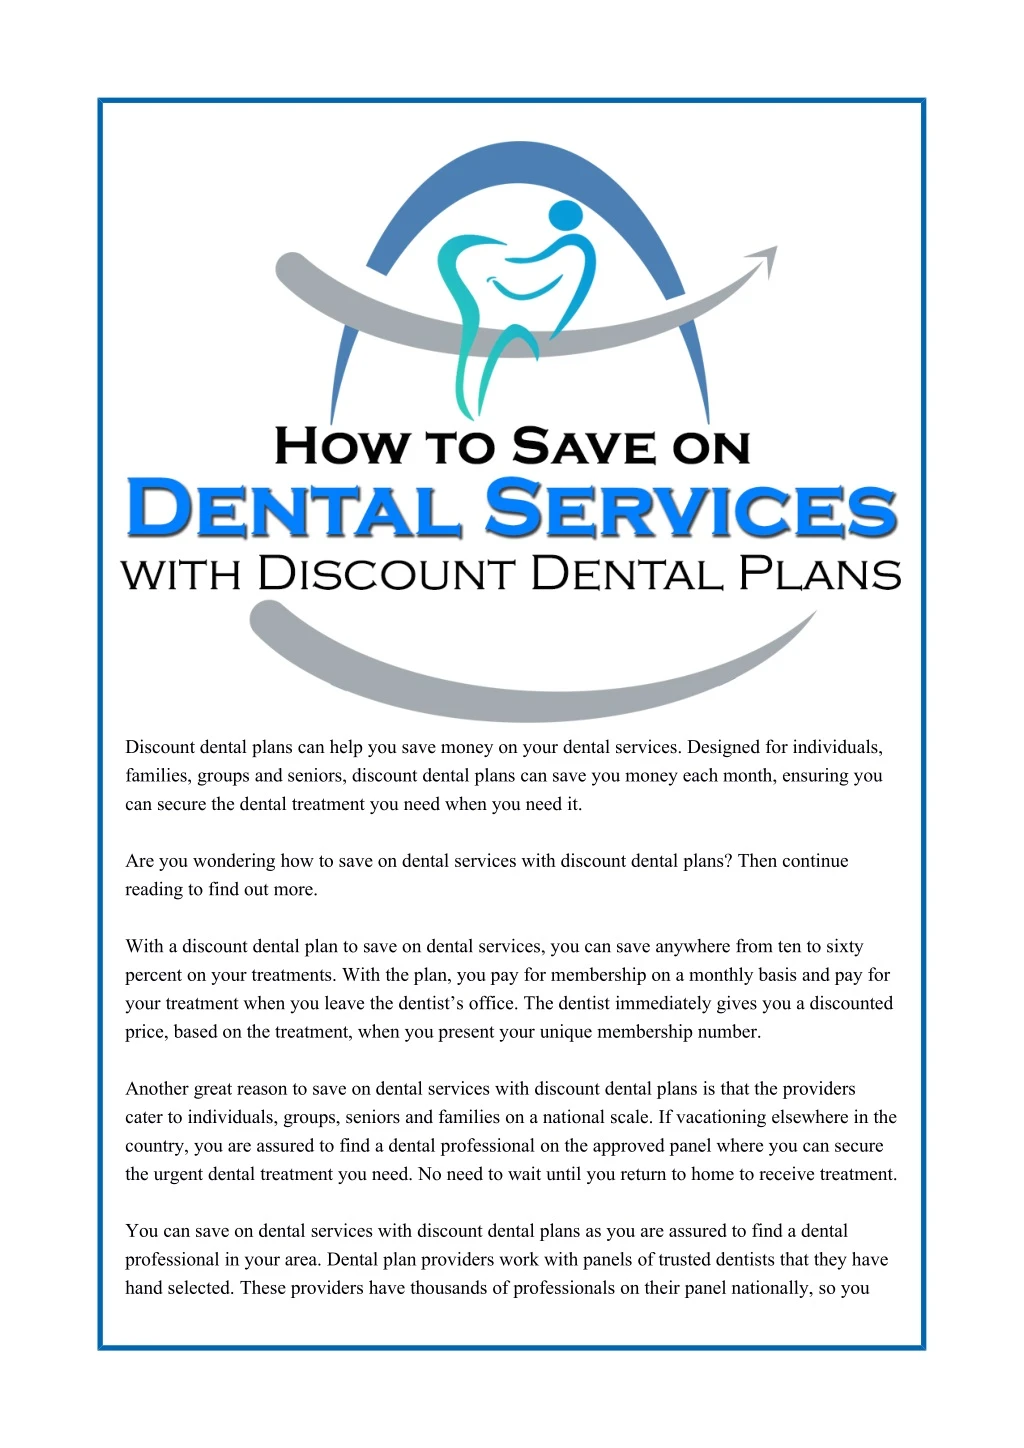 discount dental plans can help you save money